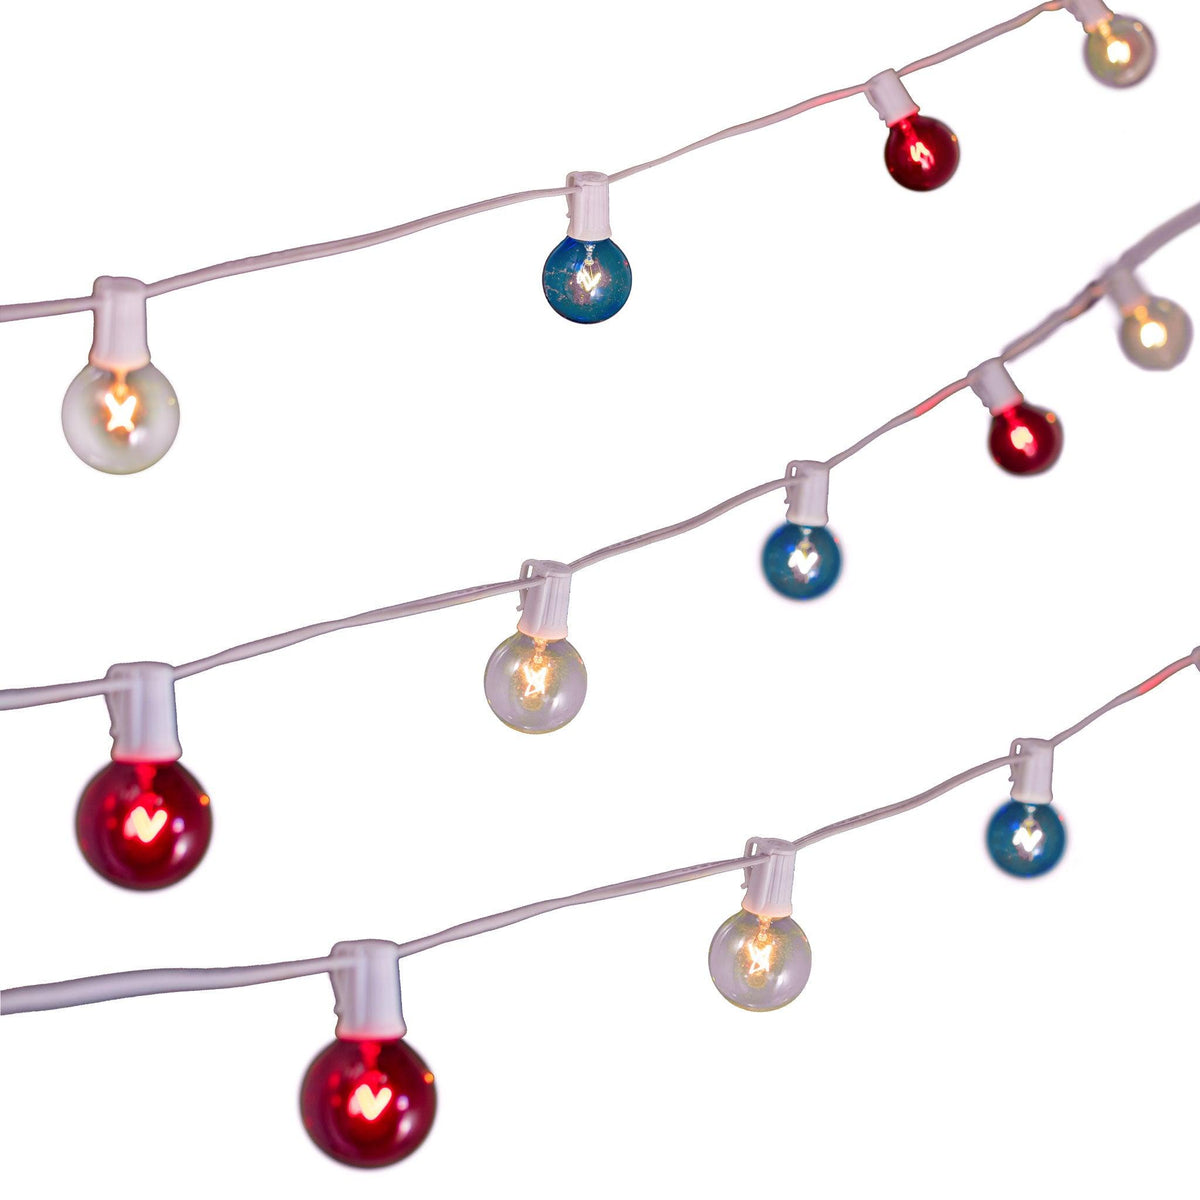 Lee Display's brand new 4th Of July G50 Globe Patio String Lights Set on sale now for the holiday season. Shop at leedisplay.com